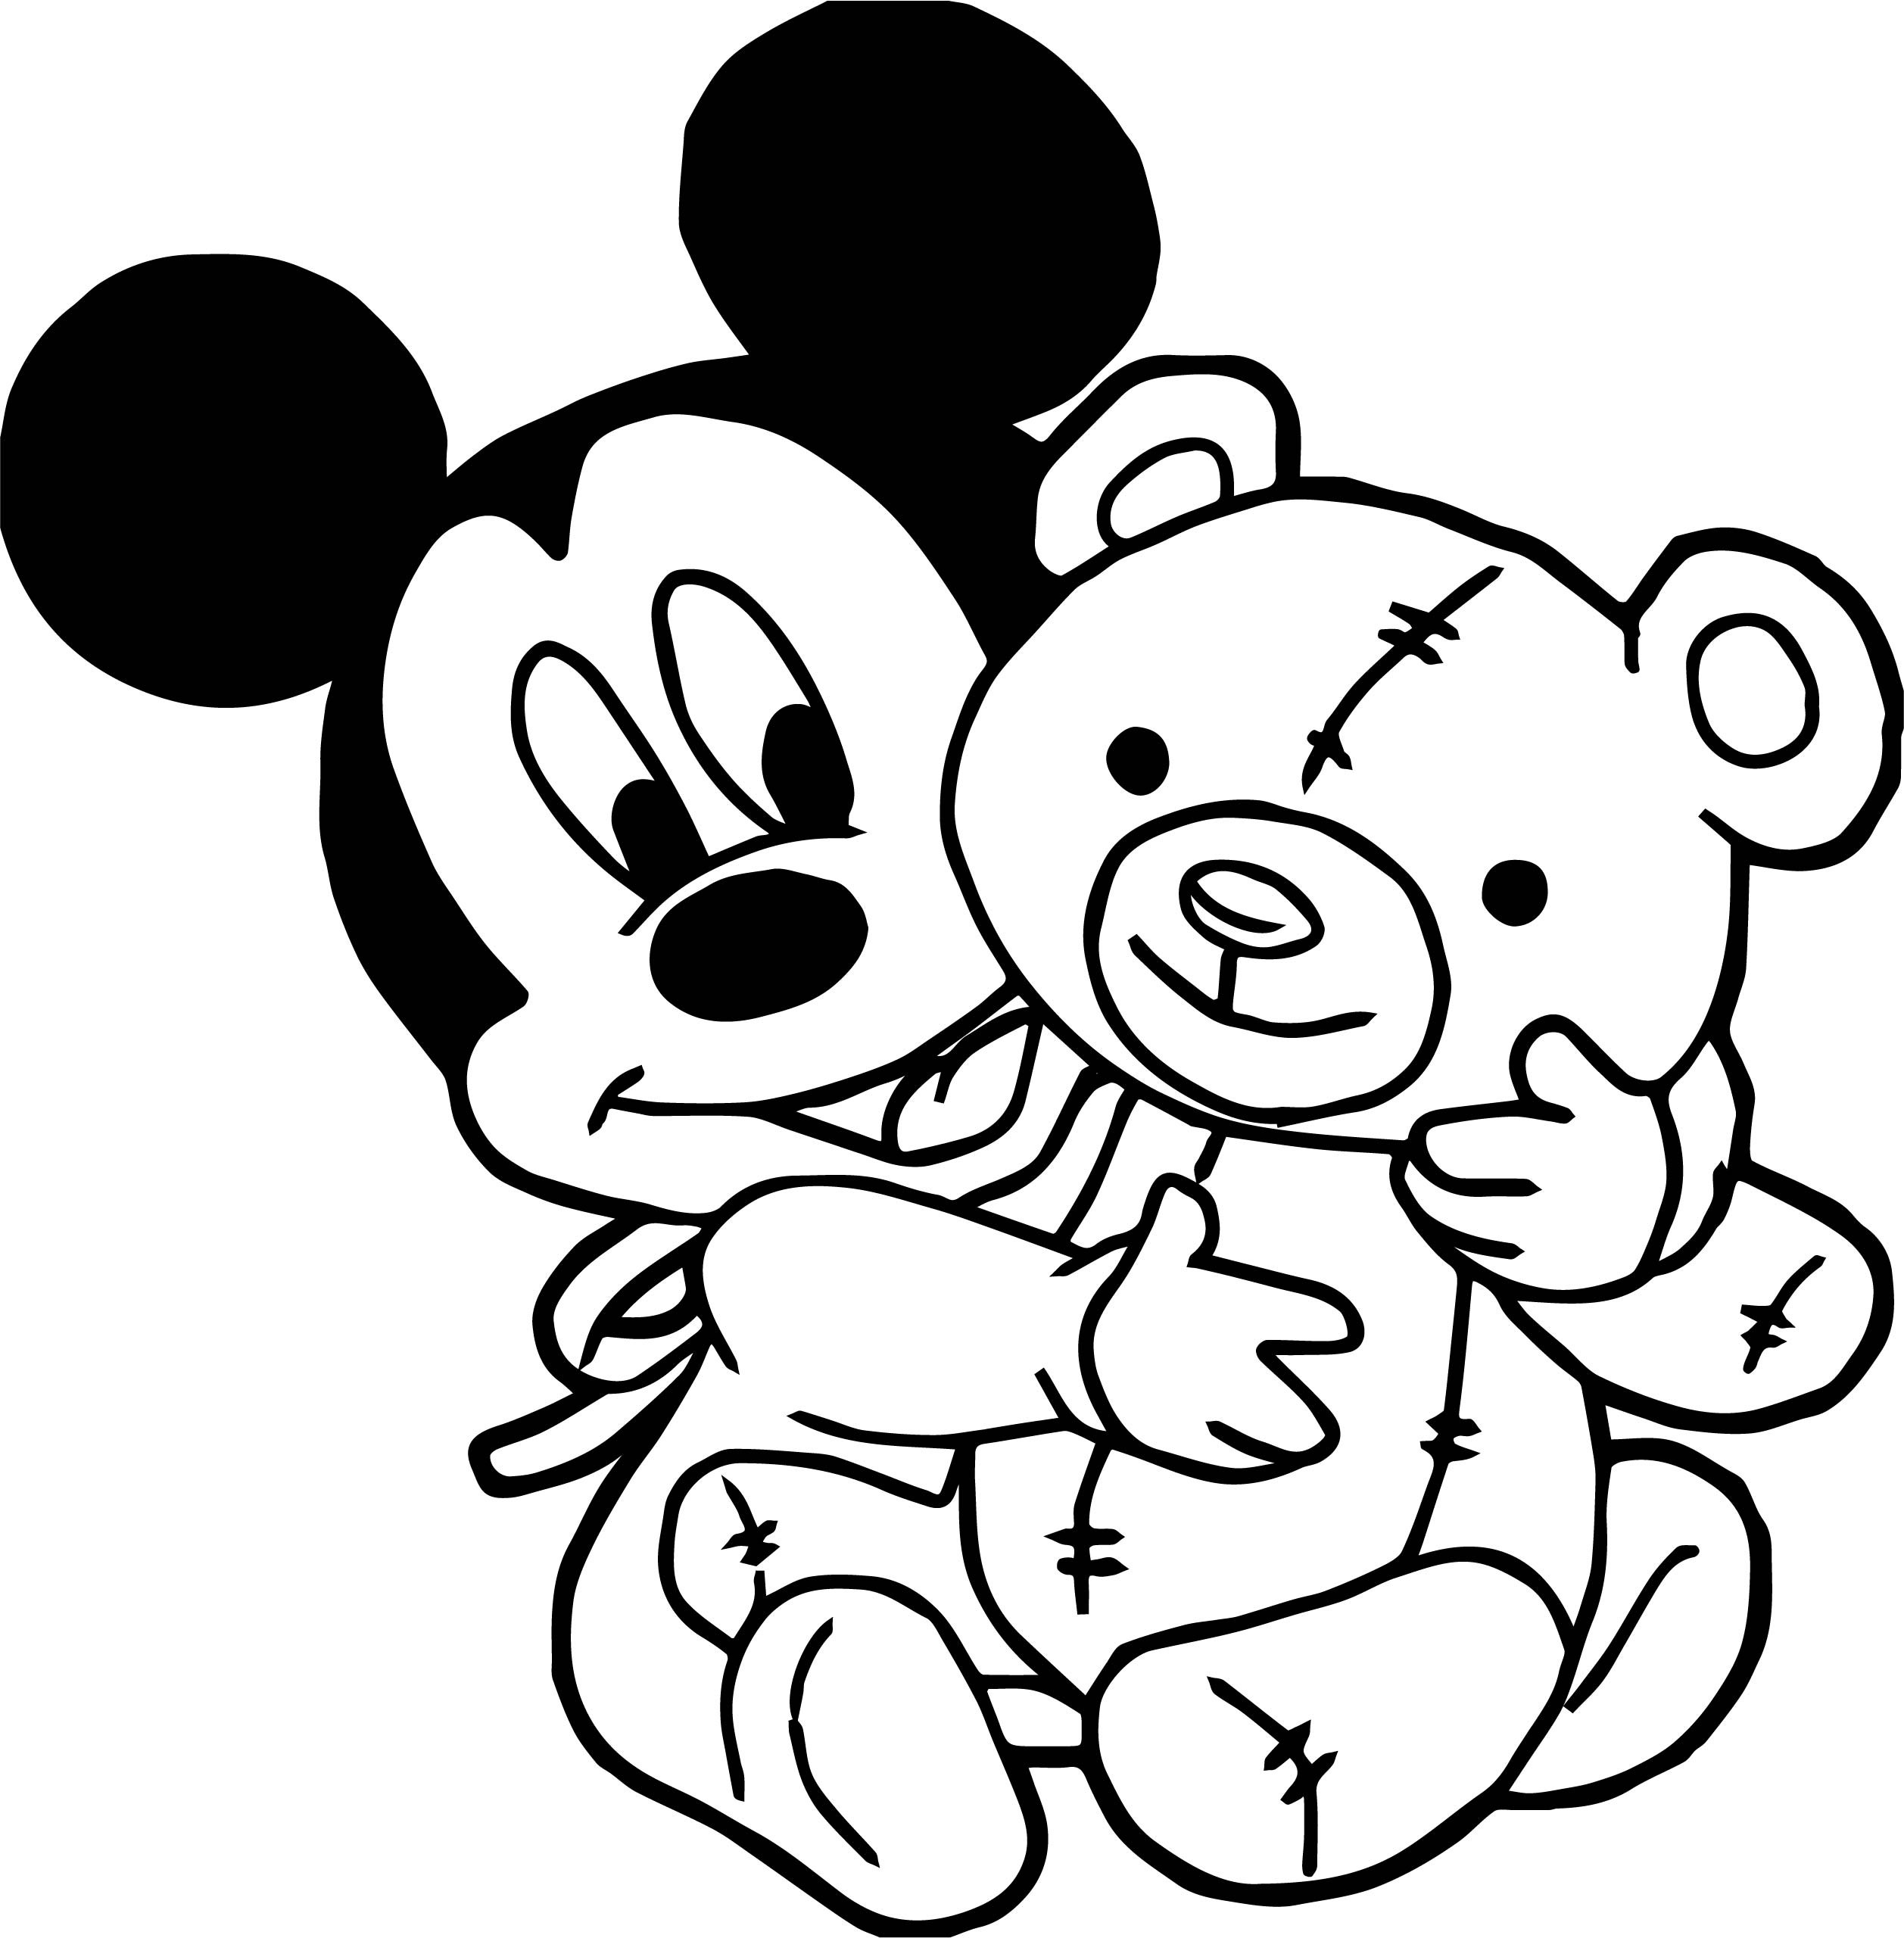 cartoon baby mickey mouse coloring pages